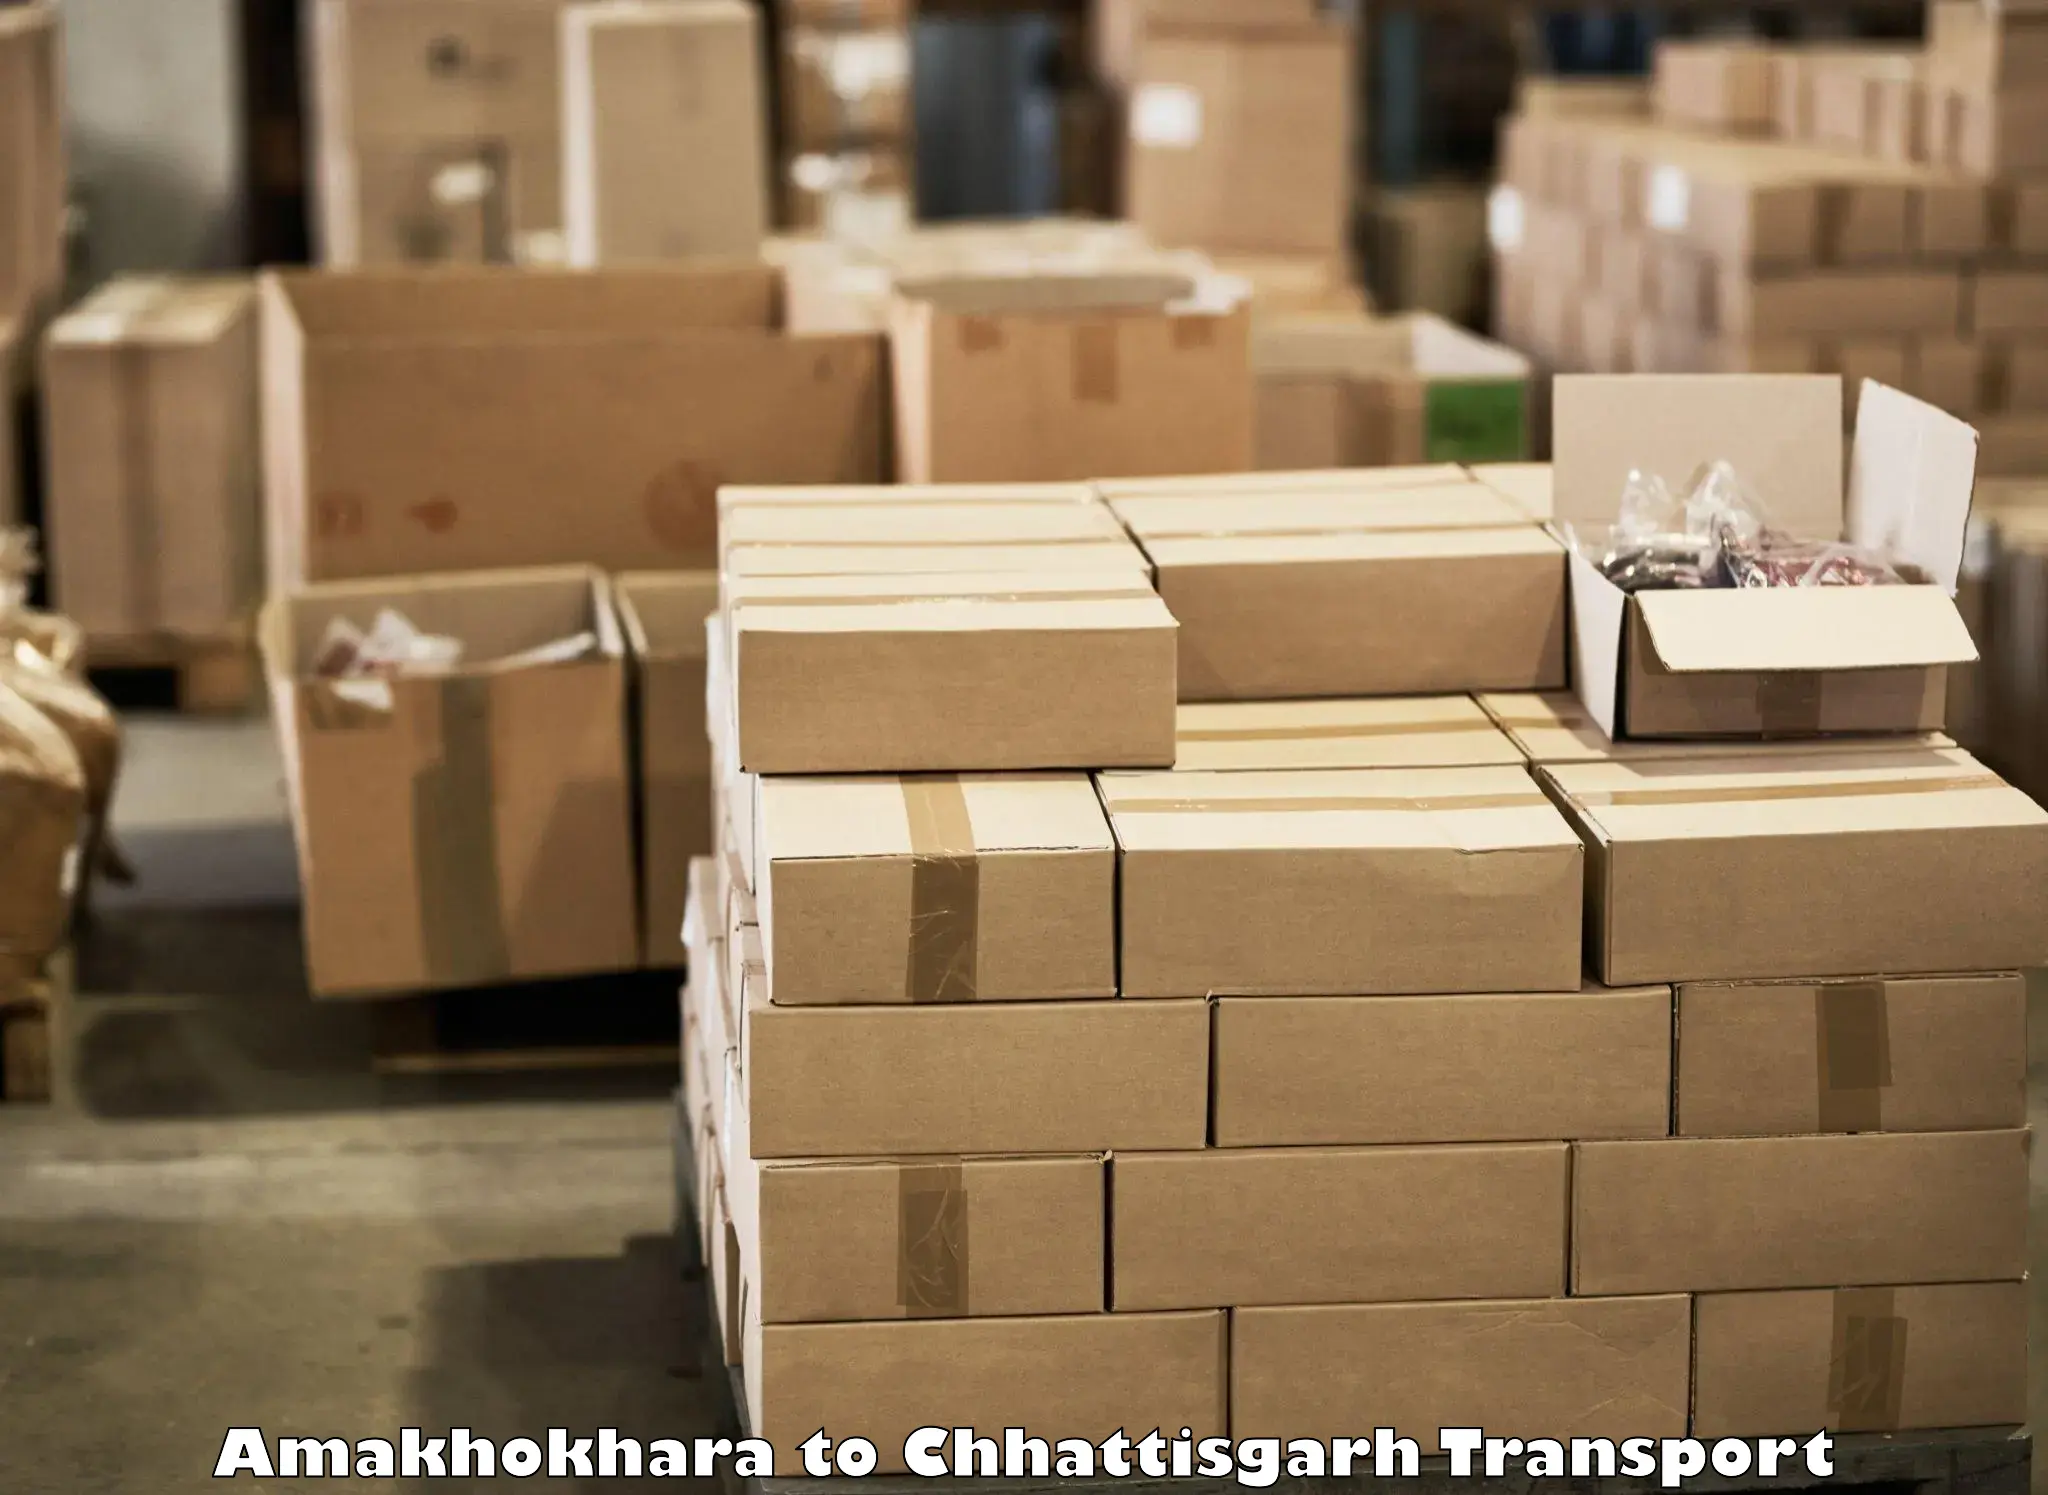 Logistics transportation services in Amakhokhara to Dongargarh